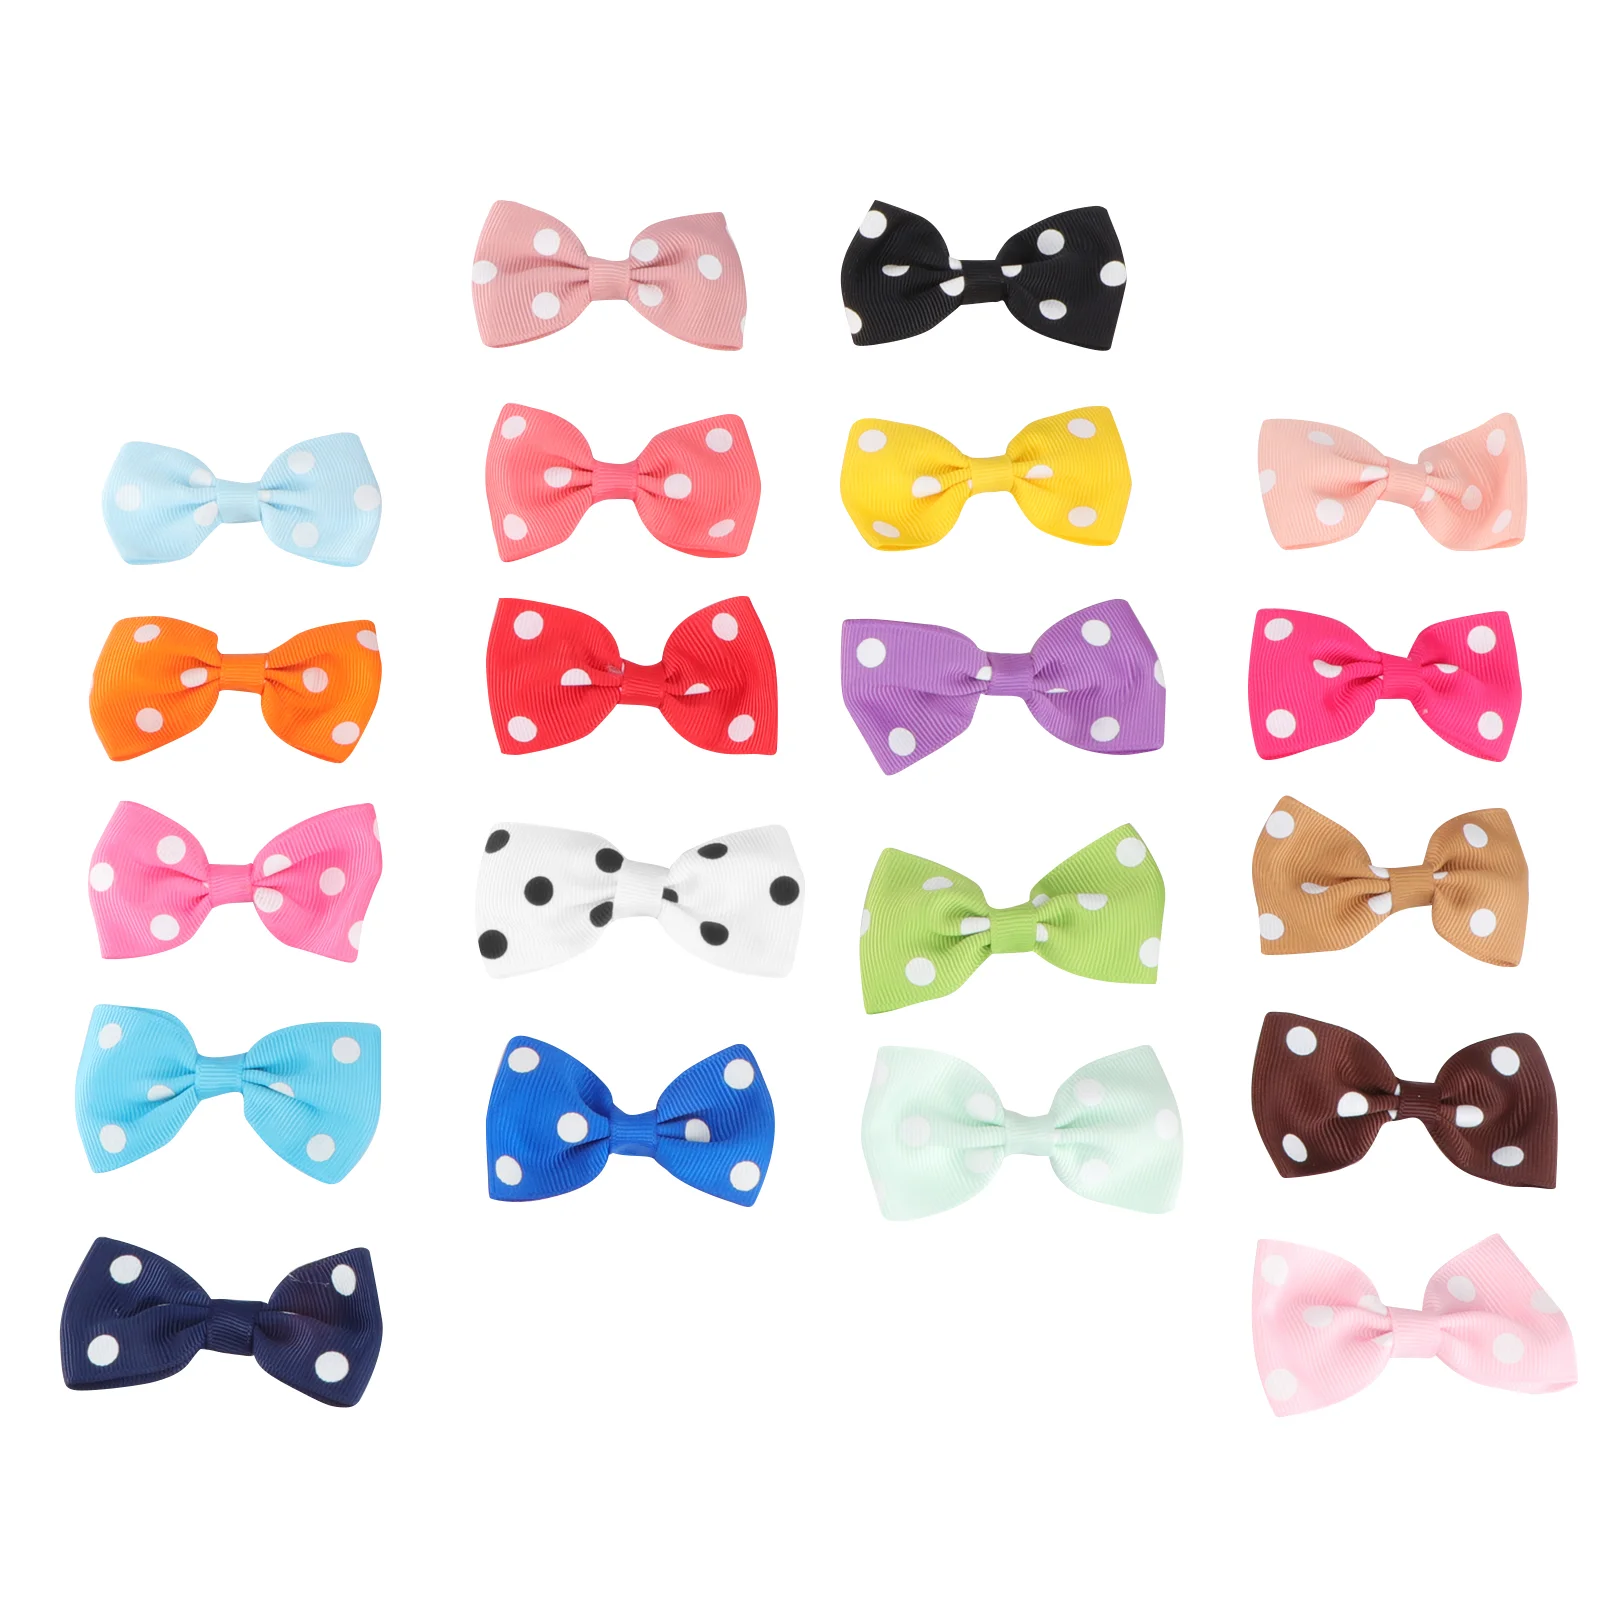 

20Pcs Bowknot Hair Bows with French Barrette Clips Polka Dot Puppies Yorkie Grooming Hair Accessories for Kids Children